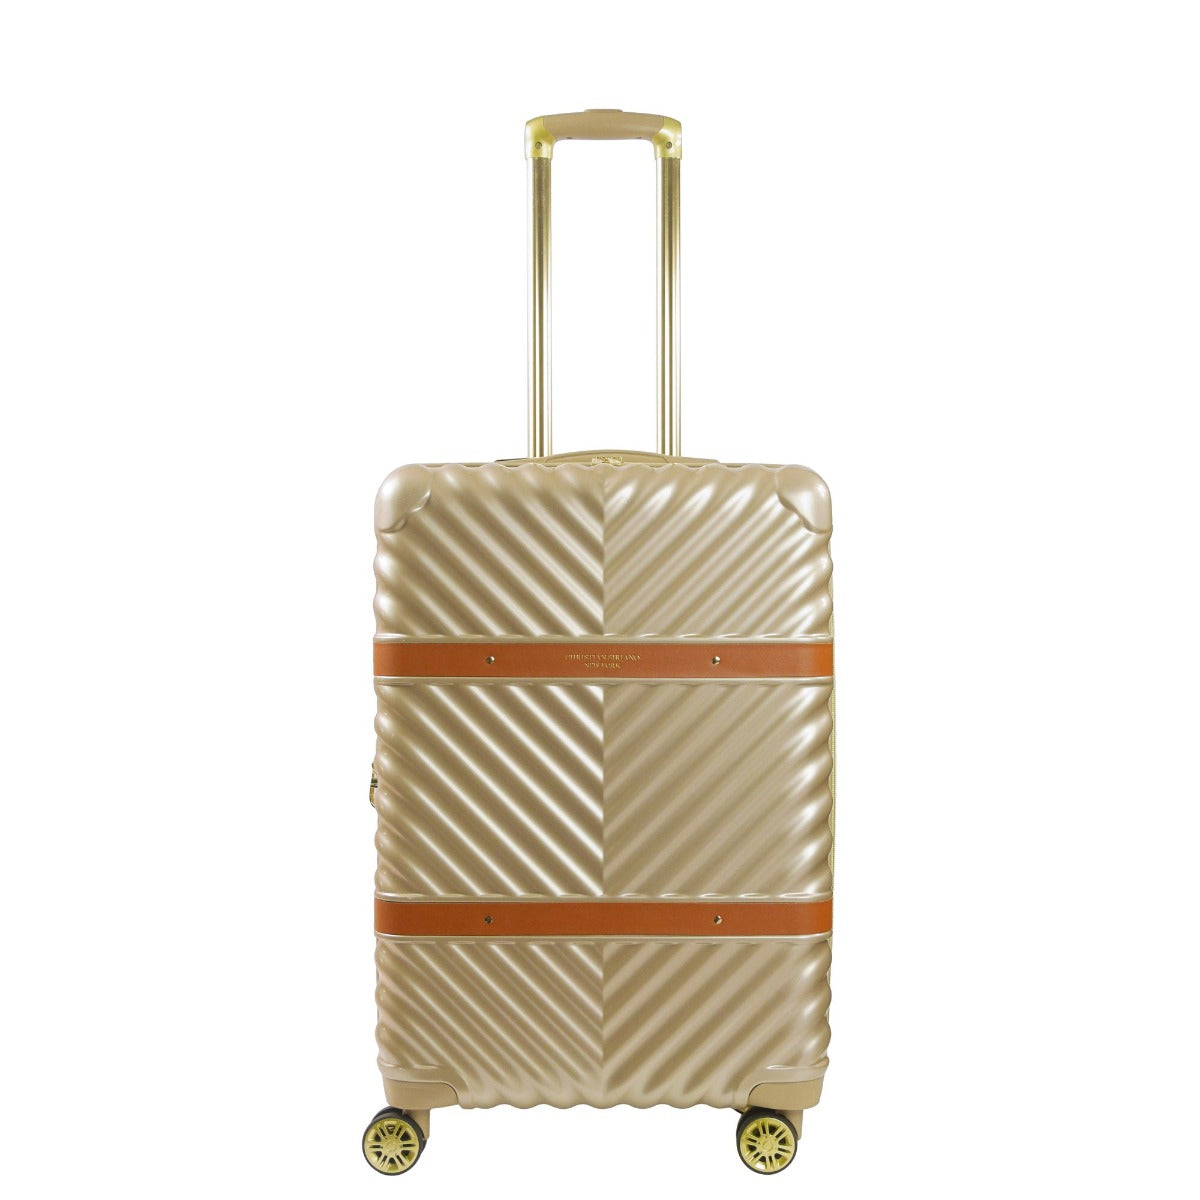 Christian Siriano New York Stella 25" hardside spinner luggage taupe - best durable checked suitcase for travel